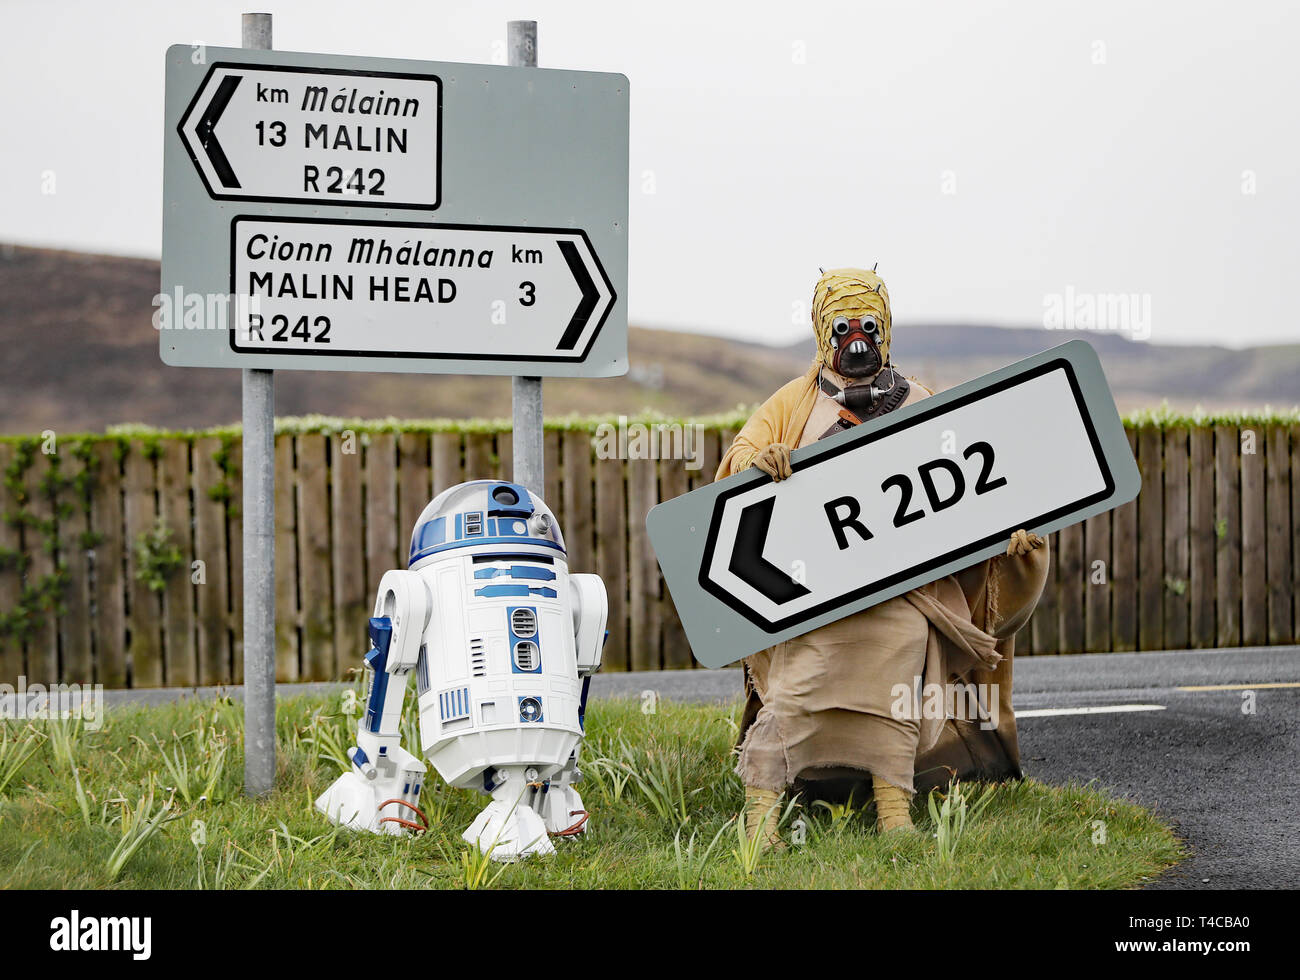 Adrian Hanna dressed as a Tusken Raider poses with an R2D2 replica built by him and his son Jack, at the opening of the R2D2 road in Malin Head, County Donegal, Ireland, ahead of the Malin Head Star Wars Festival. Stock Photo